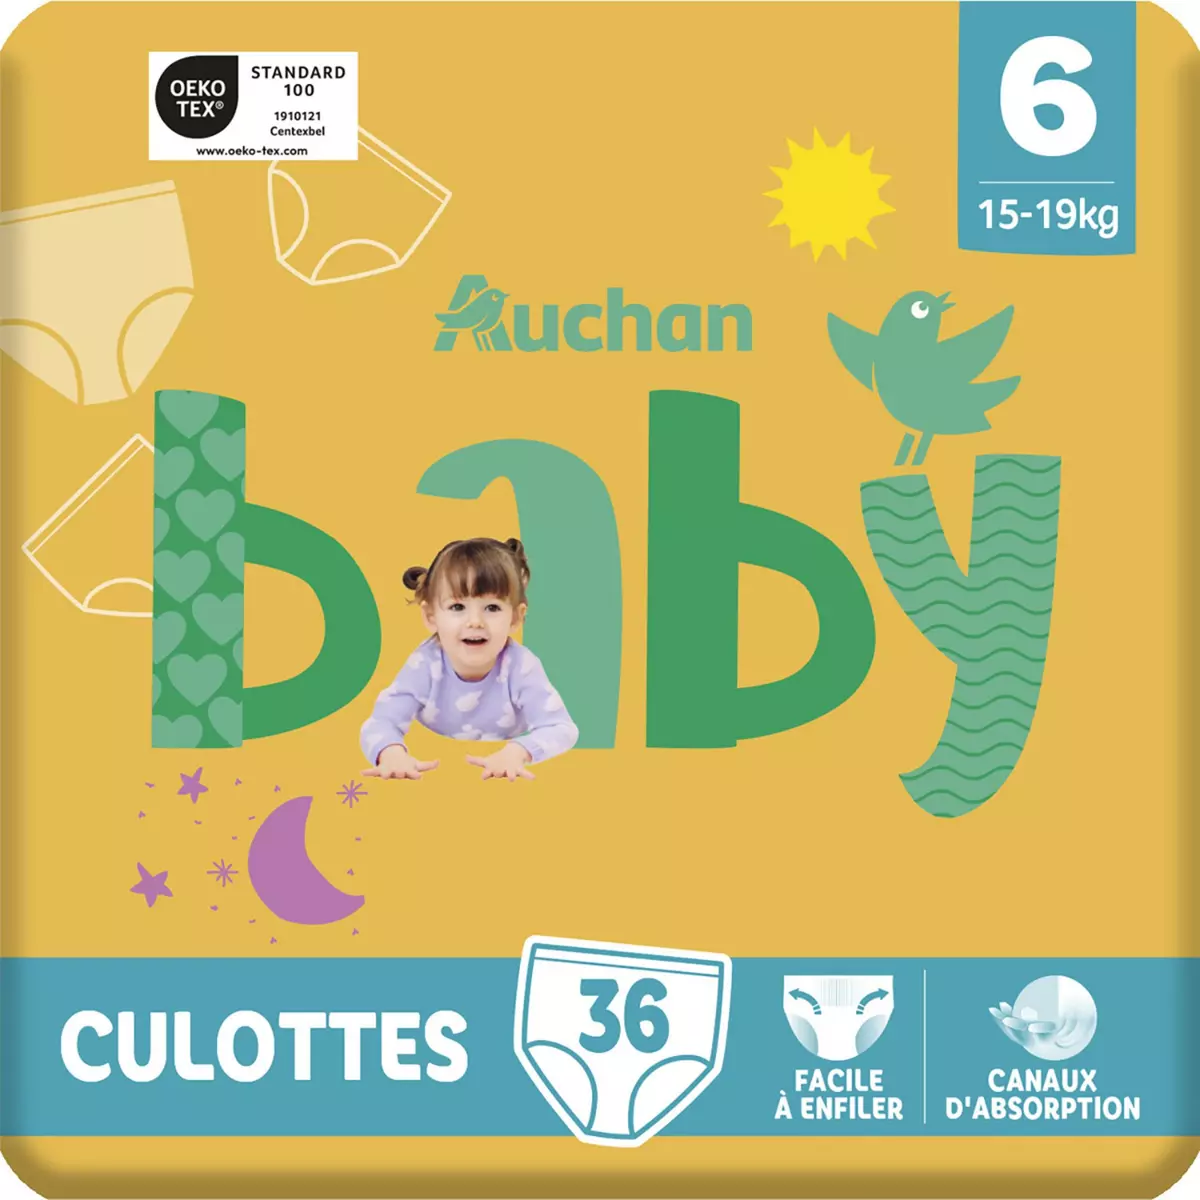 HUGGIES Extra care Couches culottes taille 6 (15-25kg) 22 pièces pas cher 